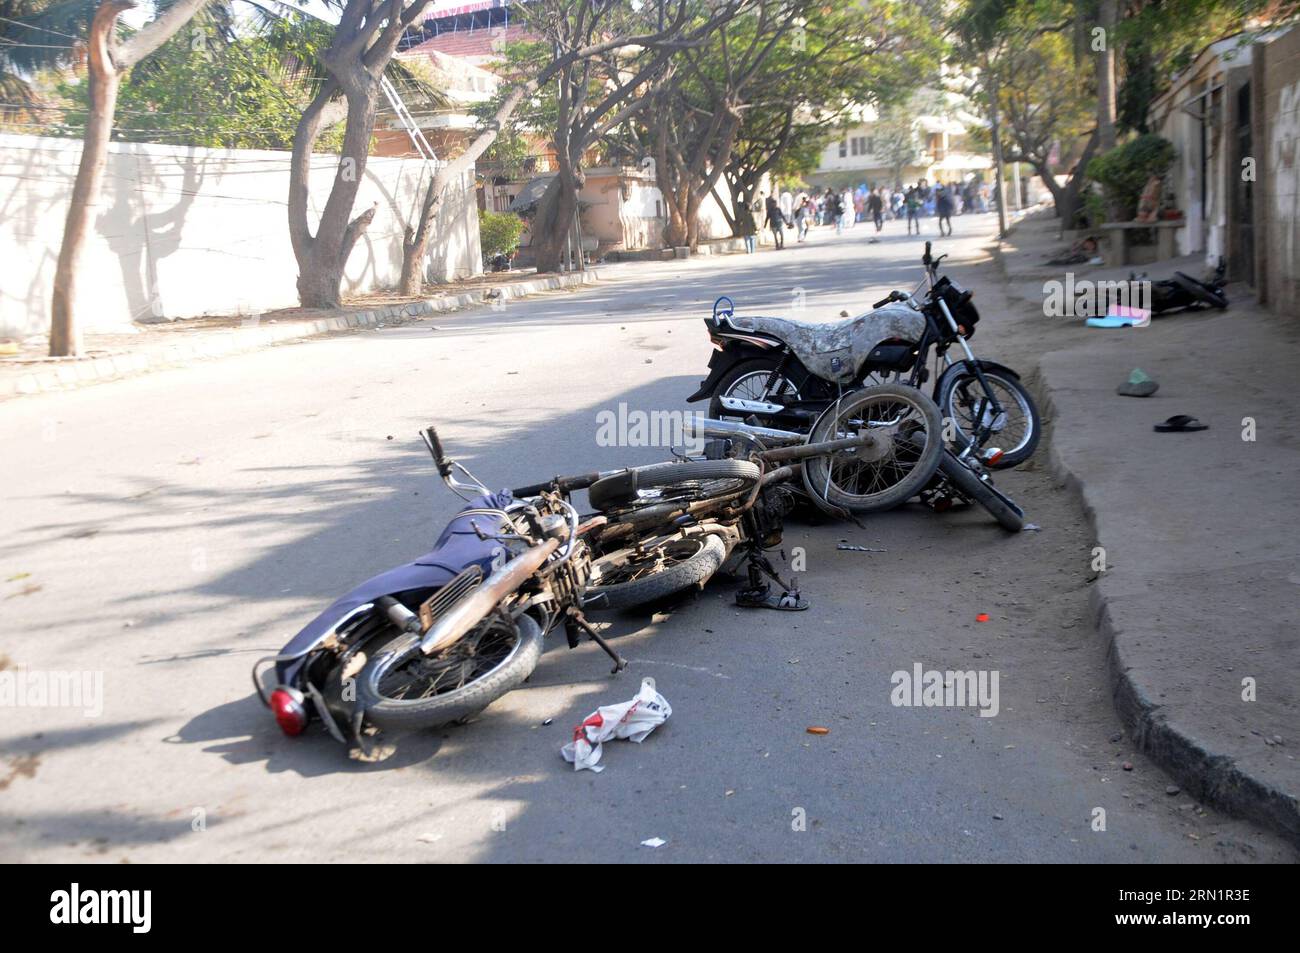 (150116) -- KARACHI, Jan. 16, 2015 -- Damaged motorbikes are seen as activists of the Jamaat-e-Islami religious party throw stones toward riot police near the French consulate during a protest against the printing of satirical sketches of the Prophet Muhammad by French magazine Charlie Hebdo in southern Pakistani port city of Karachi on Jan. 16, 2015.At least six people were injured on Friday afternoon in clashes between police and protesters as the latter marched toward the French Consulate against the printing of blasphemous caricatures by French journal Charlie Hebdo in Pakistan s southern Stock Photo